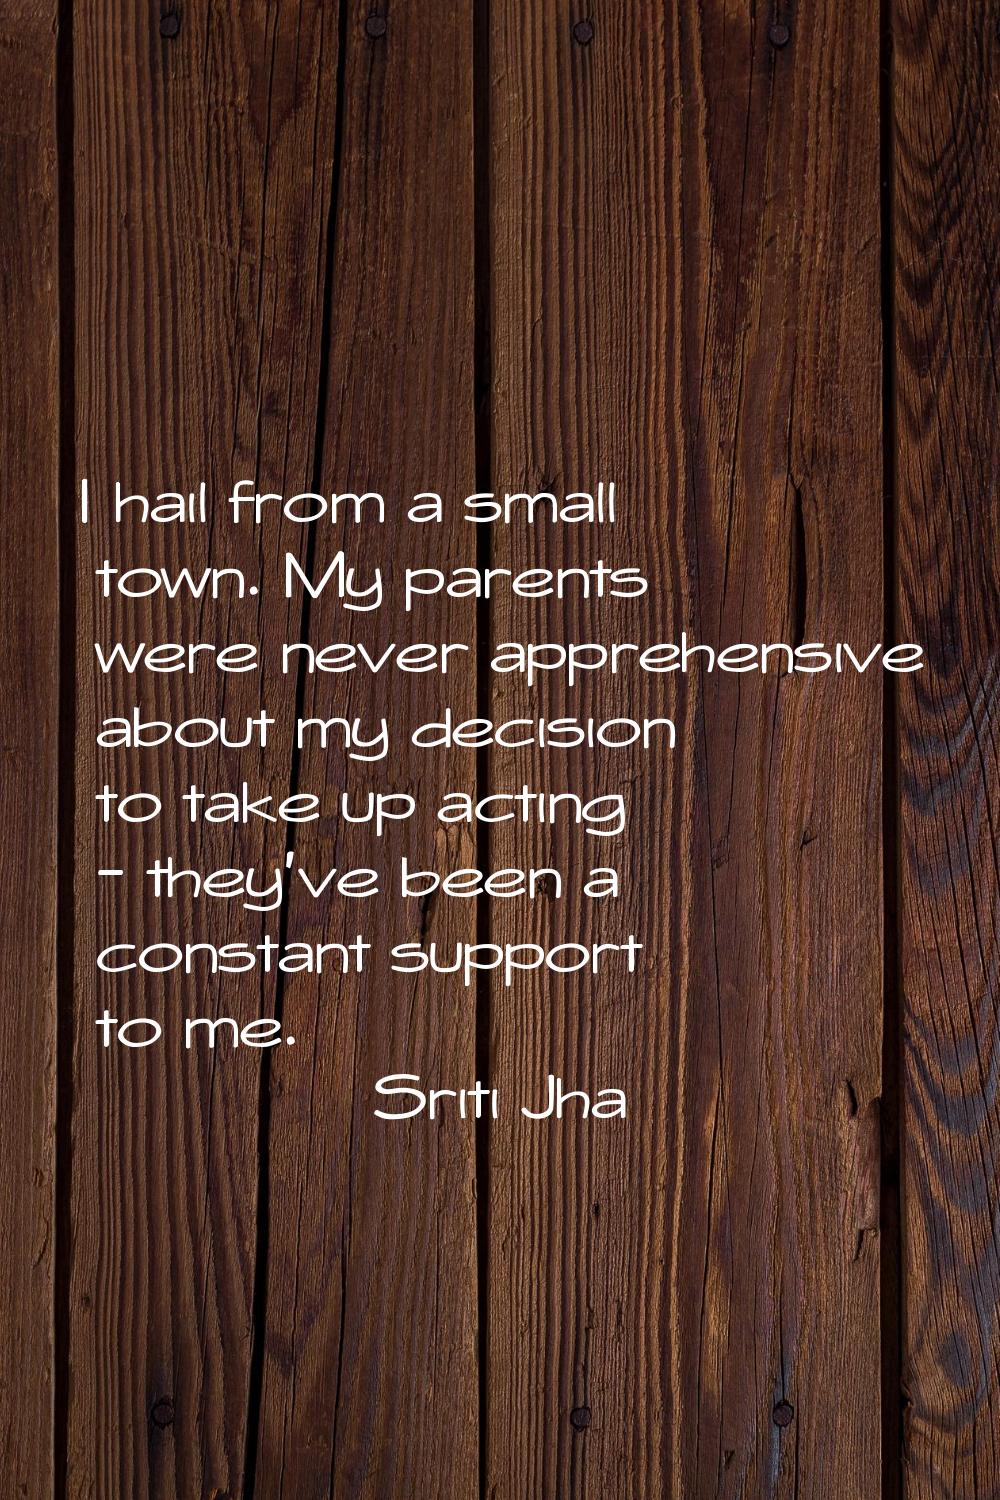 I hail from a small town. My parents were never apprehensive about my decision to take up acting - 